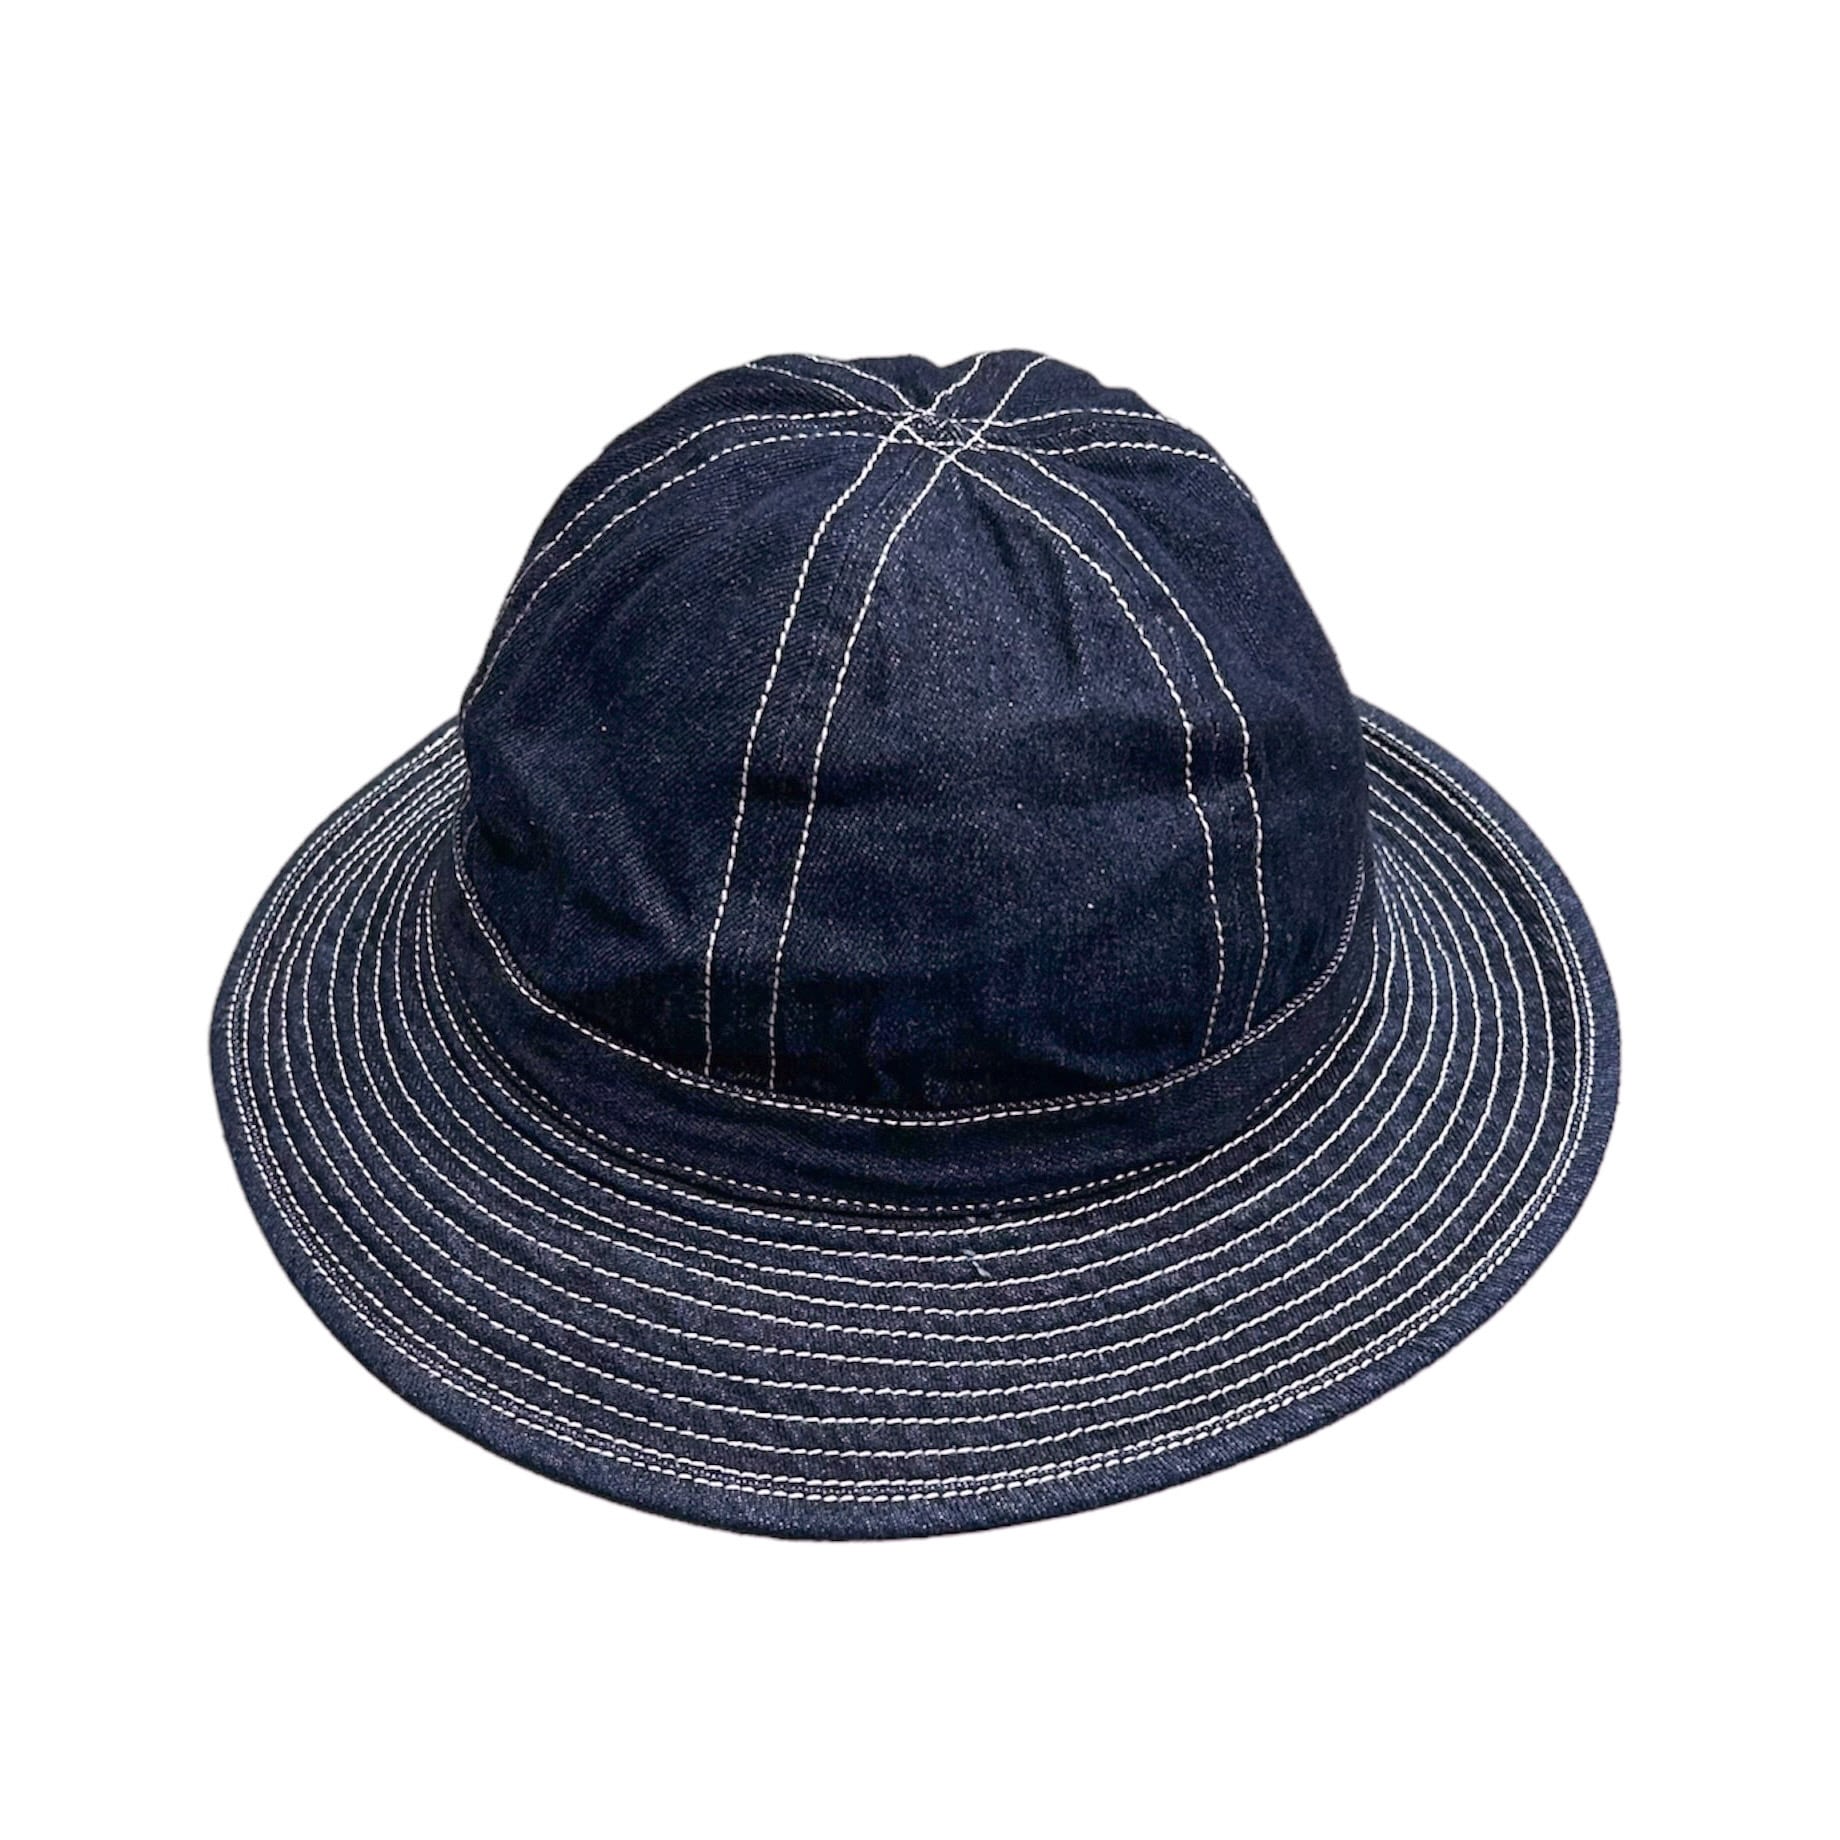 REPRODUCT US Army M-37 Denim Hat / レプリカ リプロダクト アメリカ軍 デニムハット ミリタリー